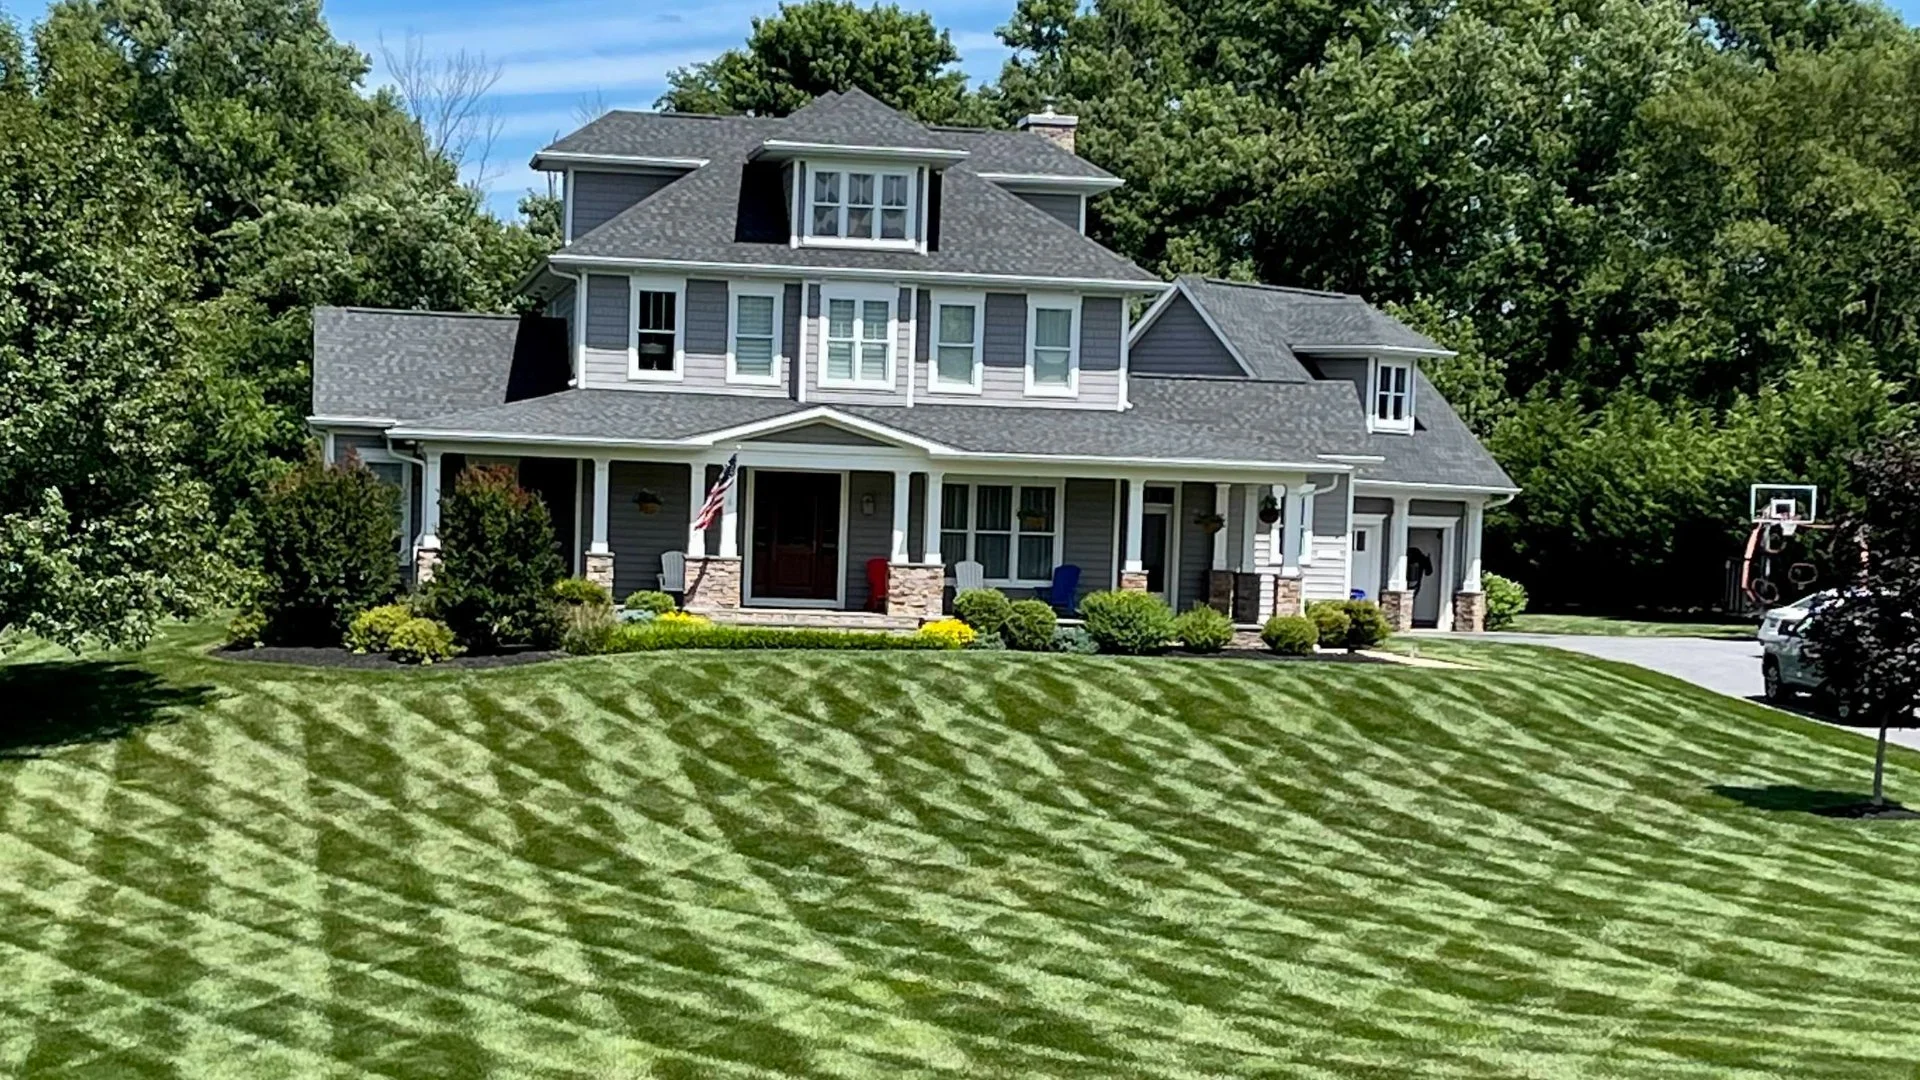 Large residential property in Westminster, MD with a beautiful green lawn.